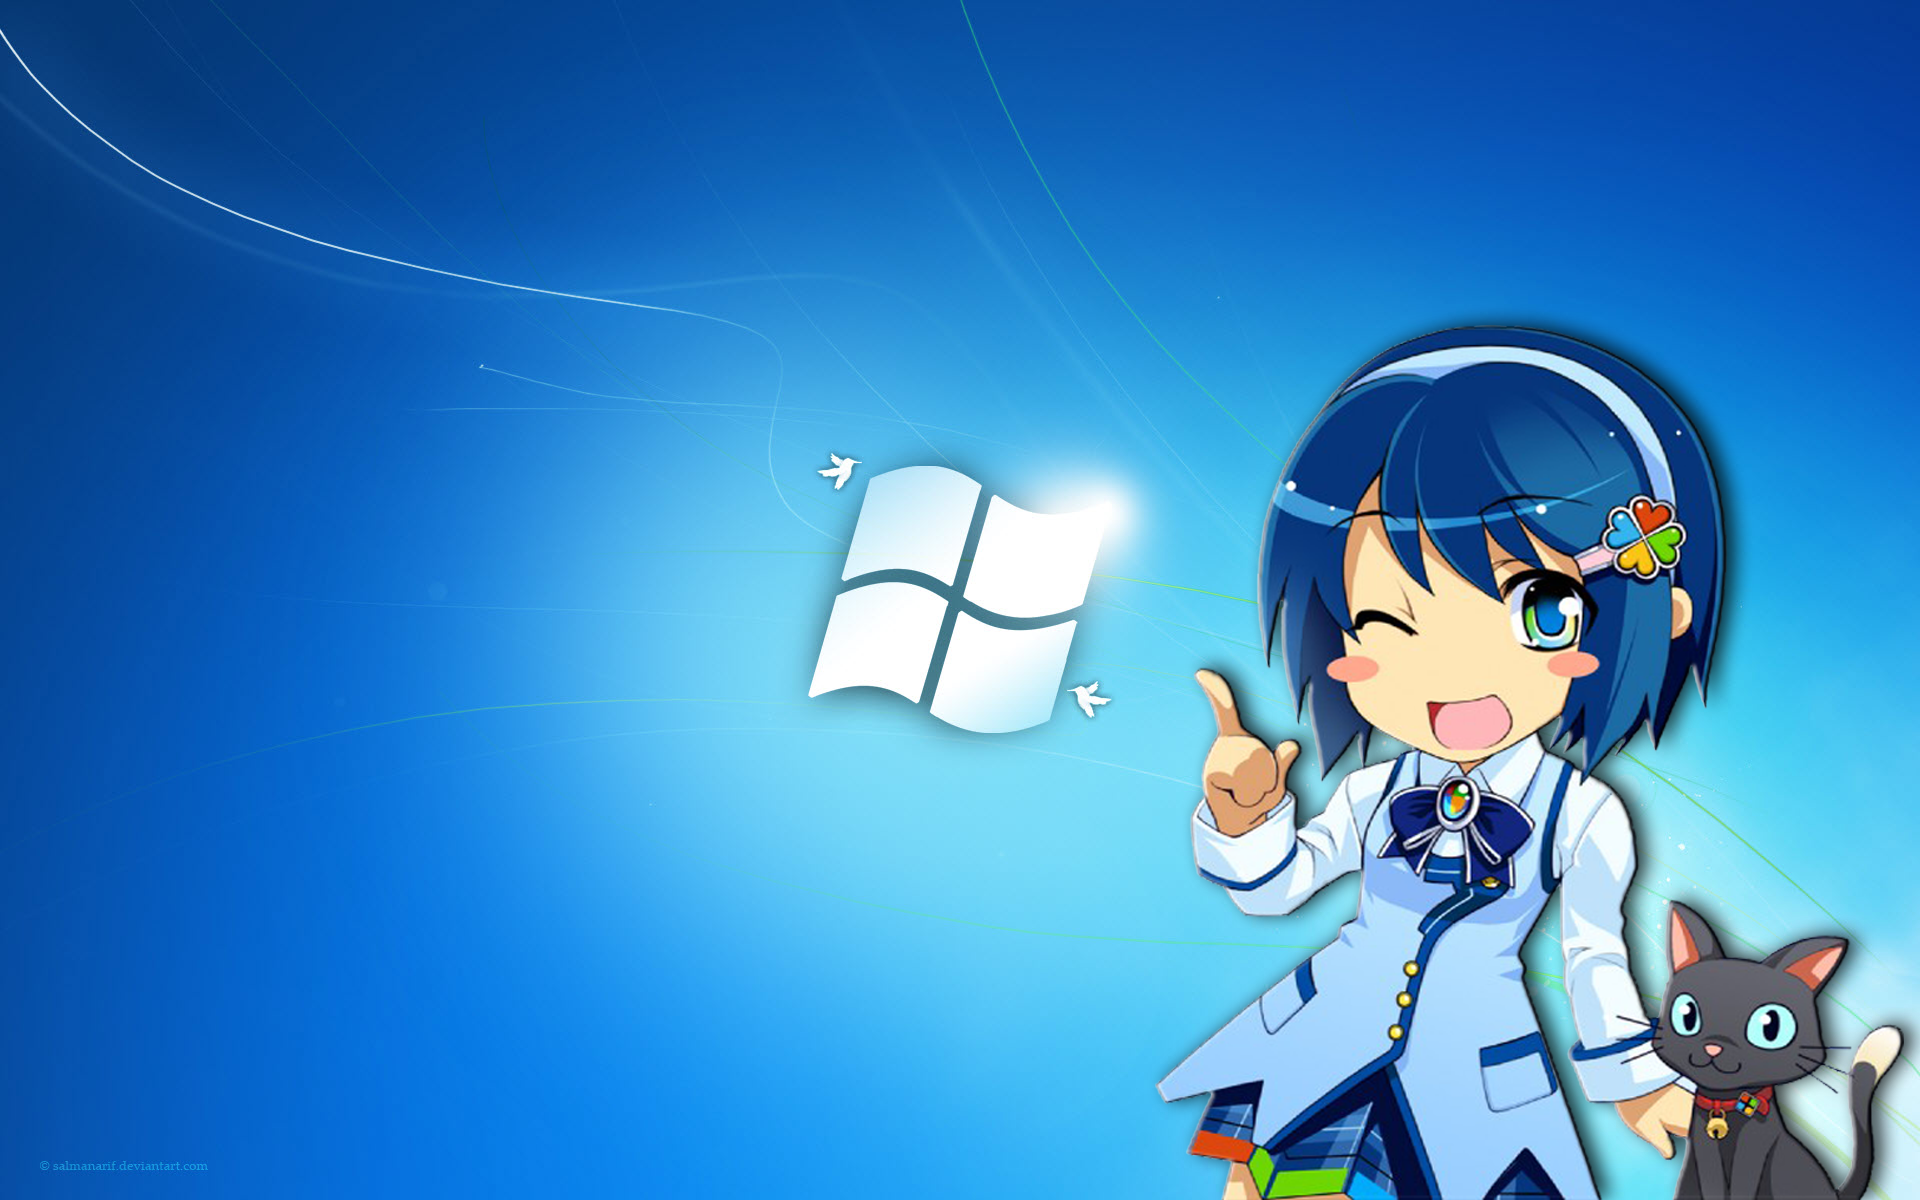 Os-tan wearing an anime-inspired outfit, perfect for desktop wallpaper.